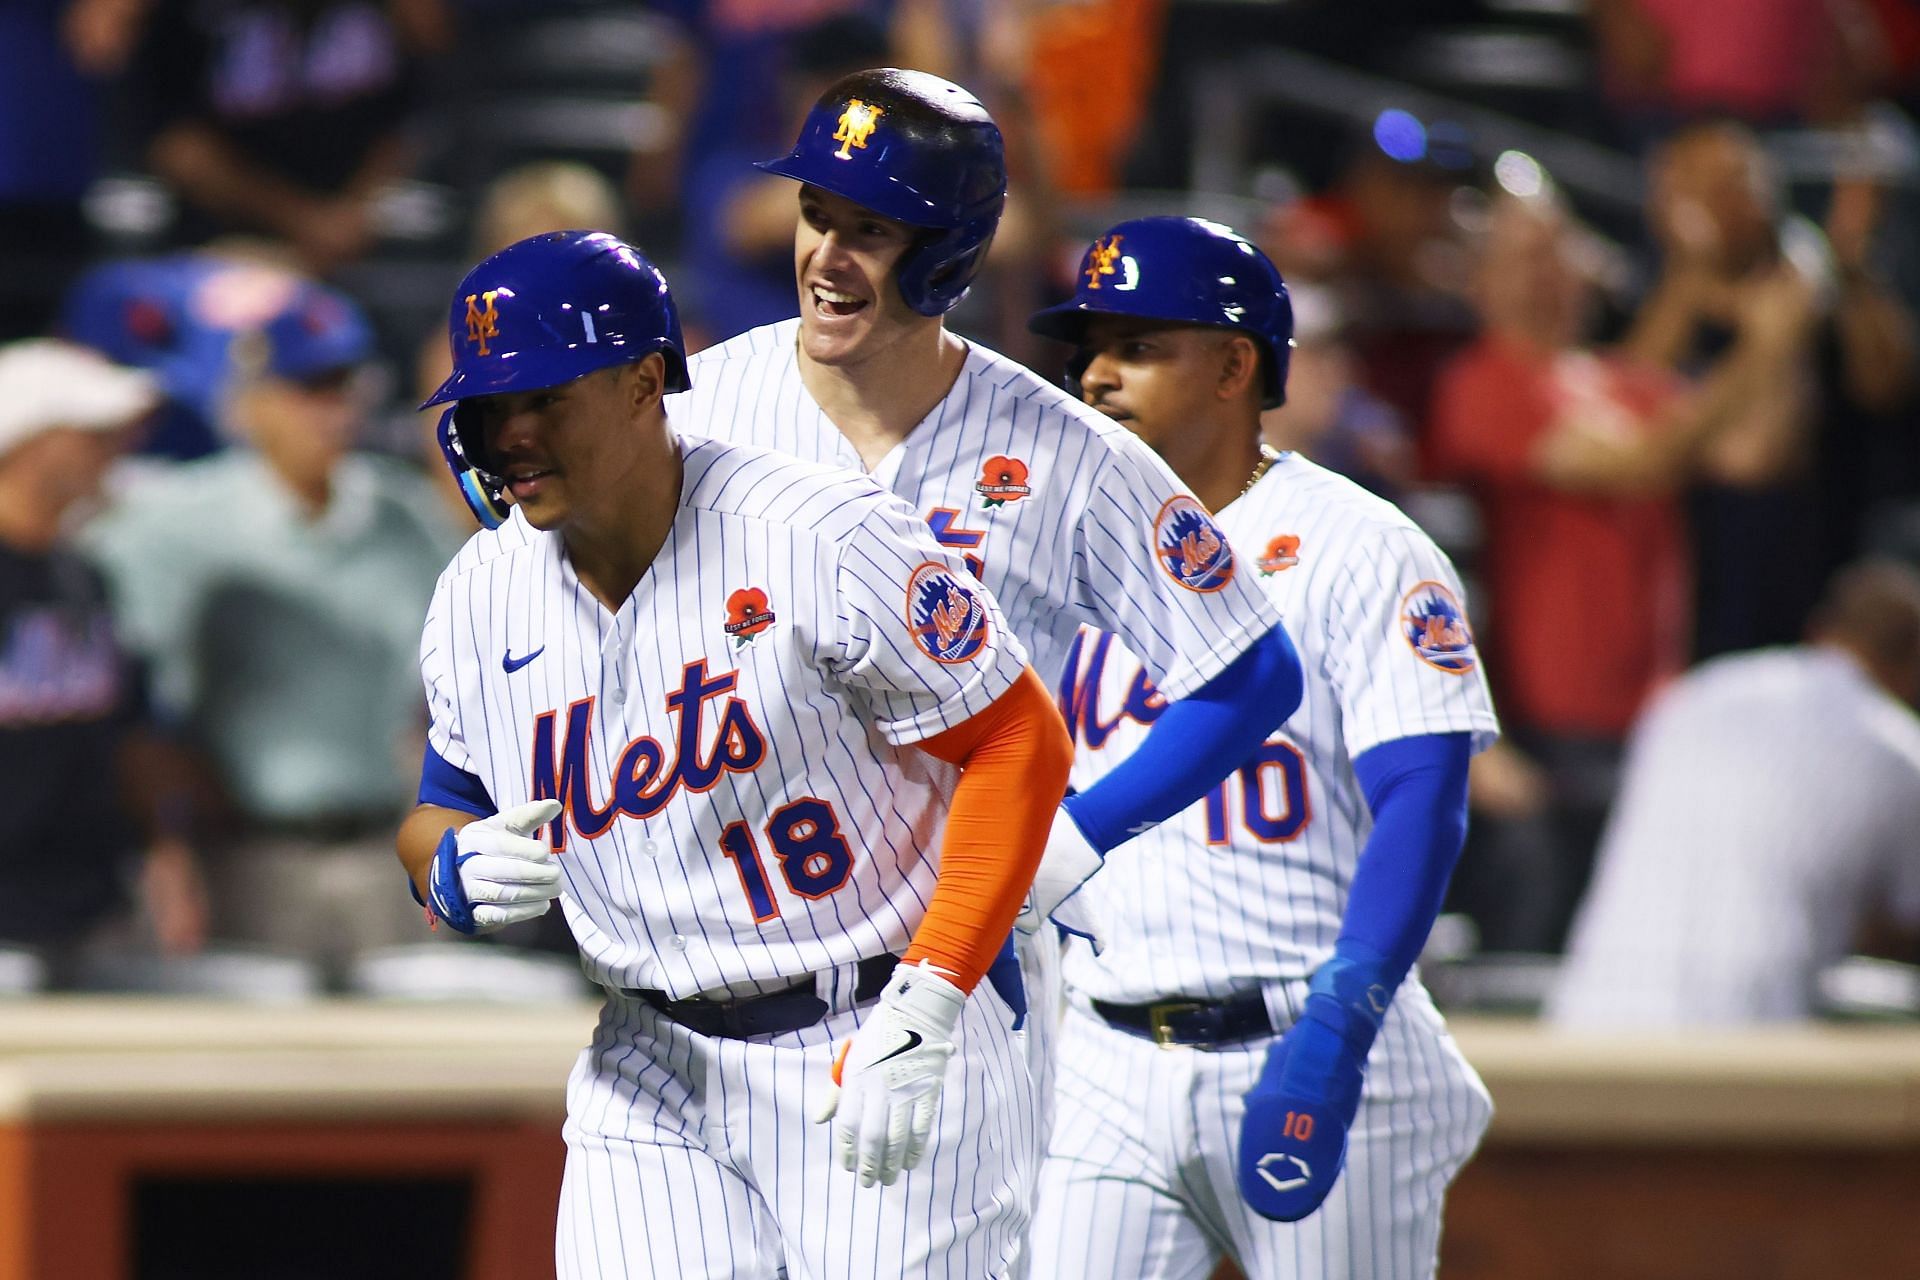 Nick Plummer of the New York Mets celebrates after hitting a three-run homer.